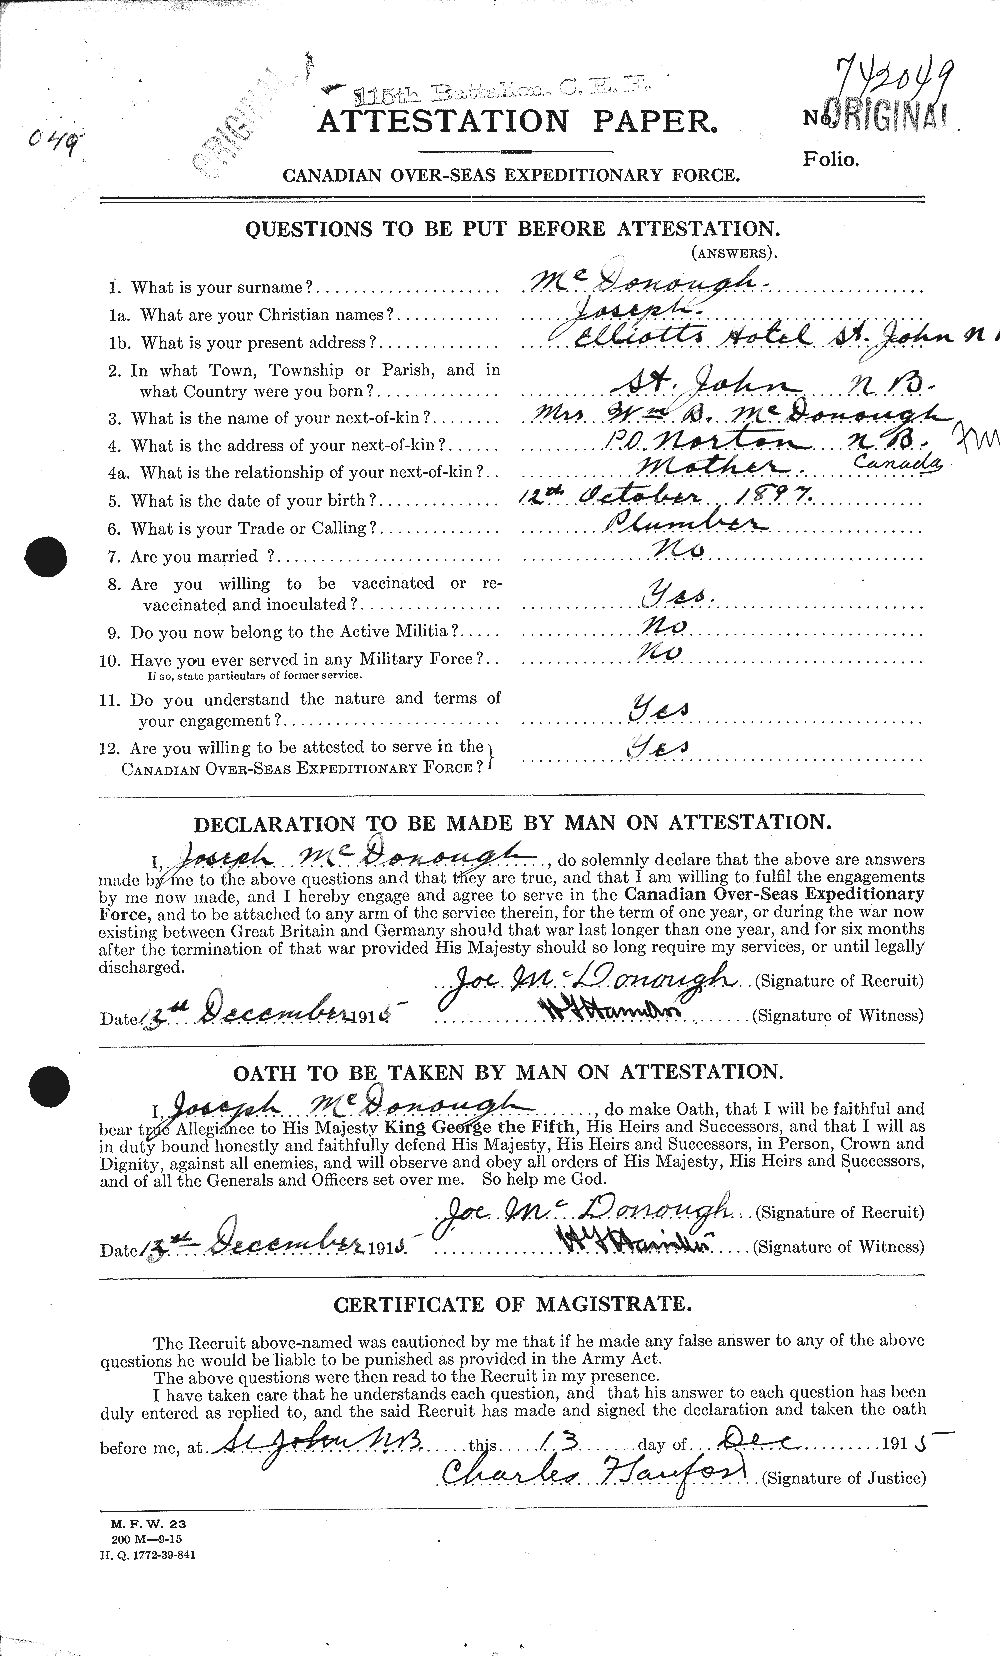 Personnel Records of the First World War - CEF 525123a